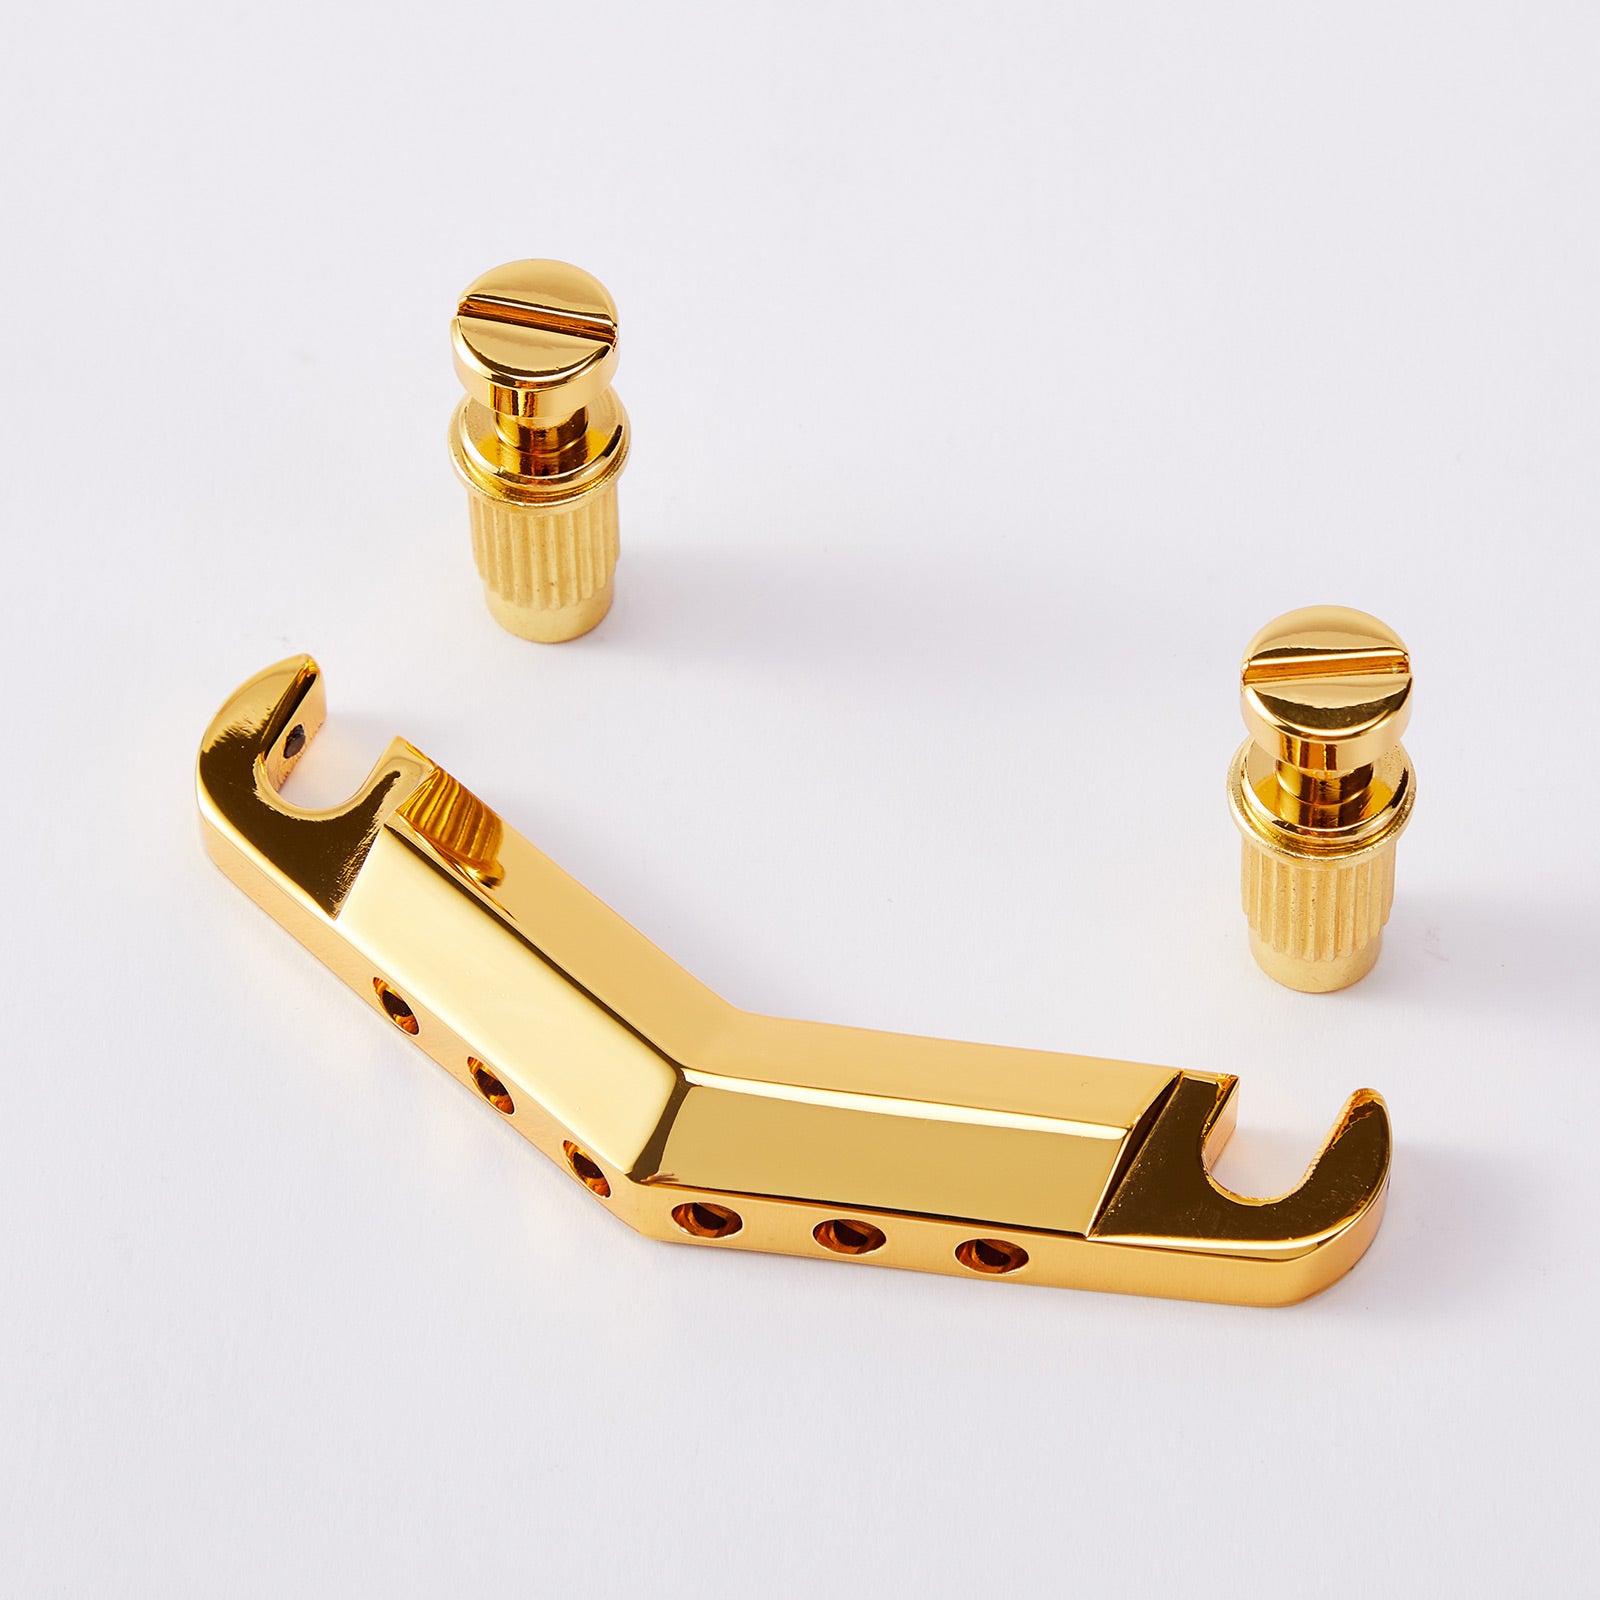 Guitar Stop Bar Tailpiece with Anchors and Studs Replacement Part